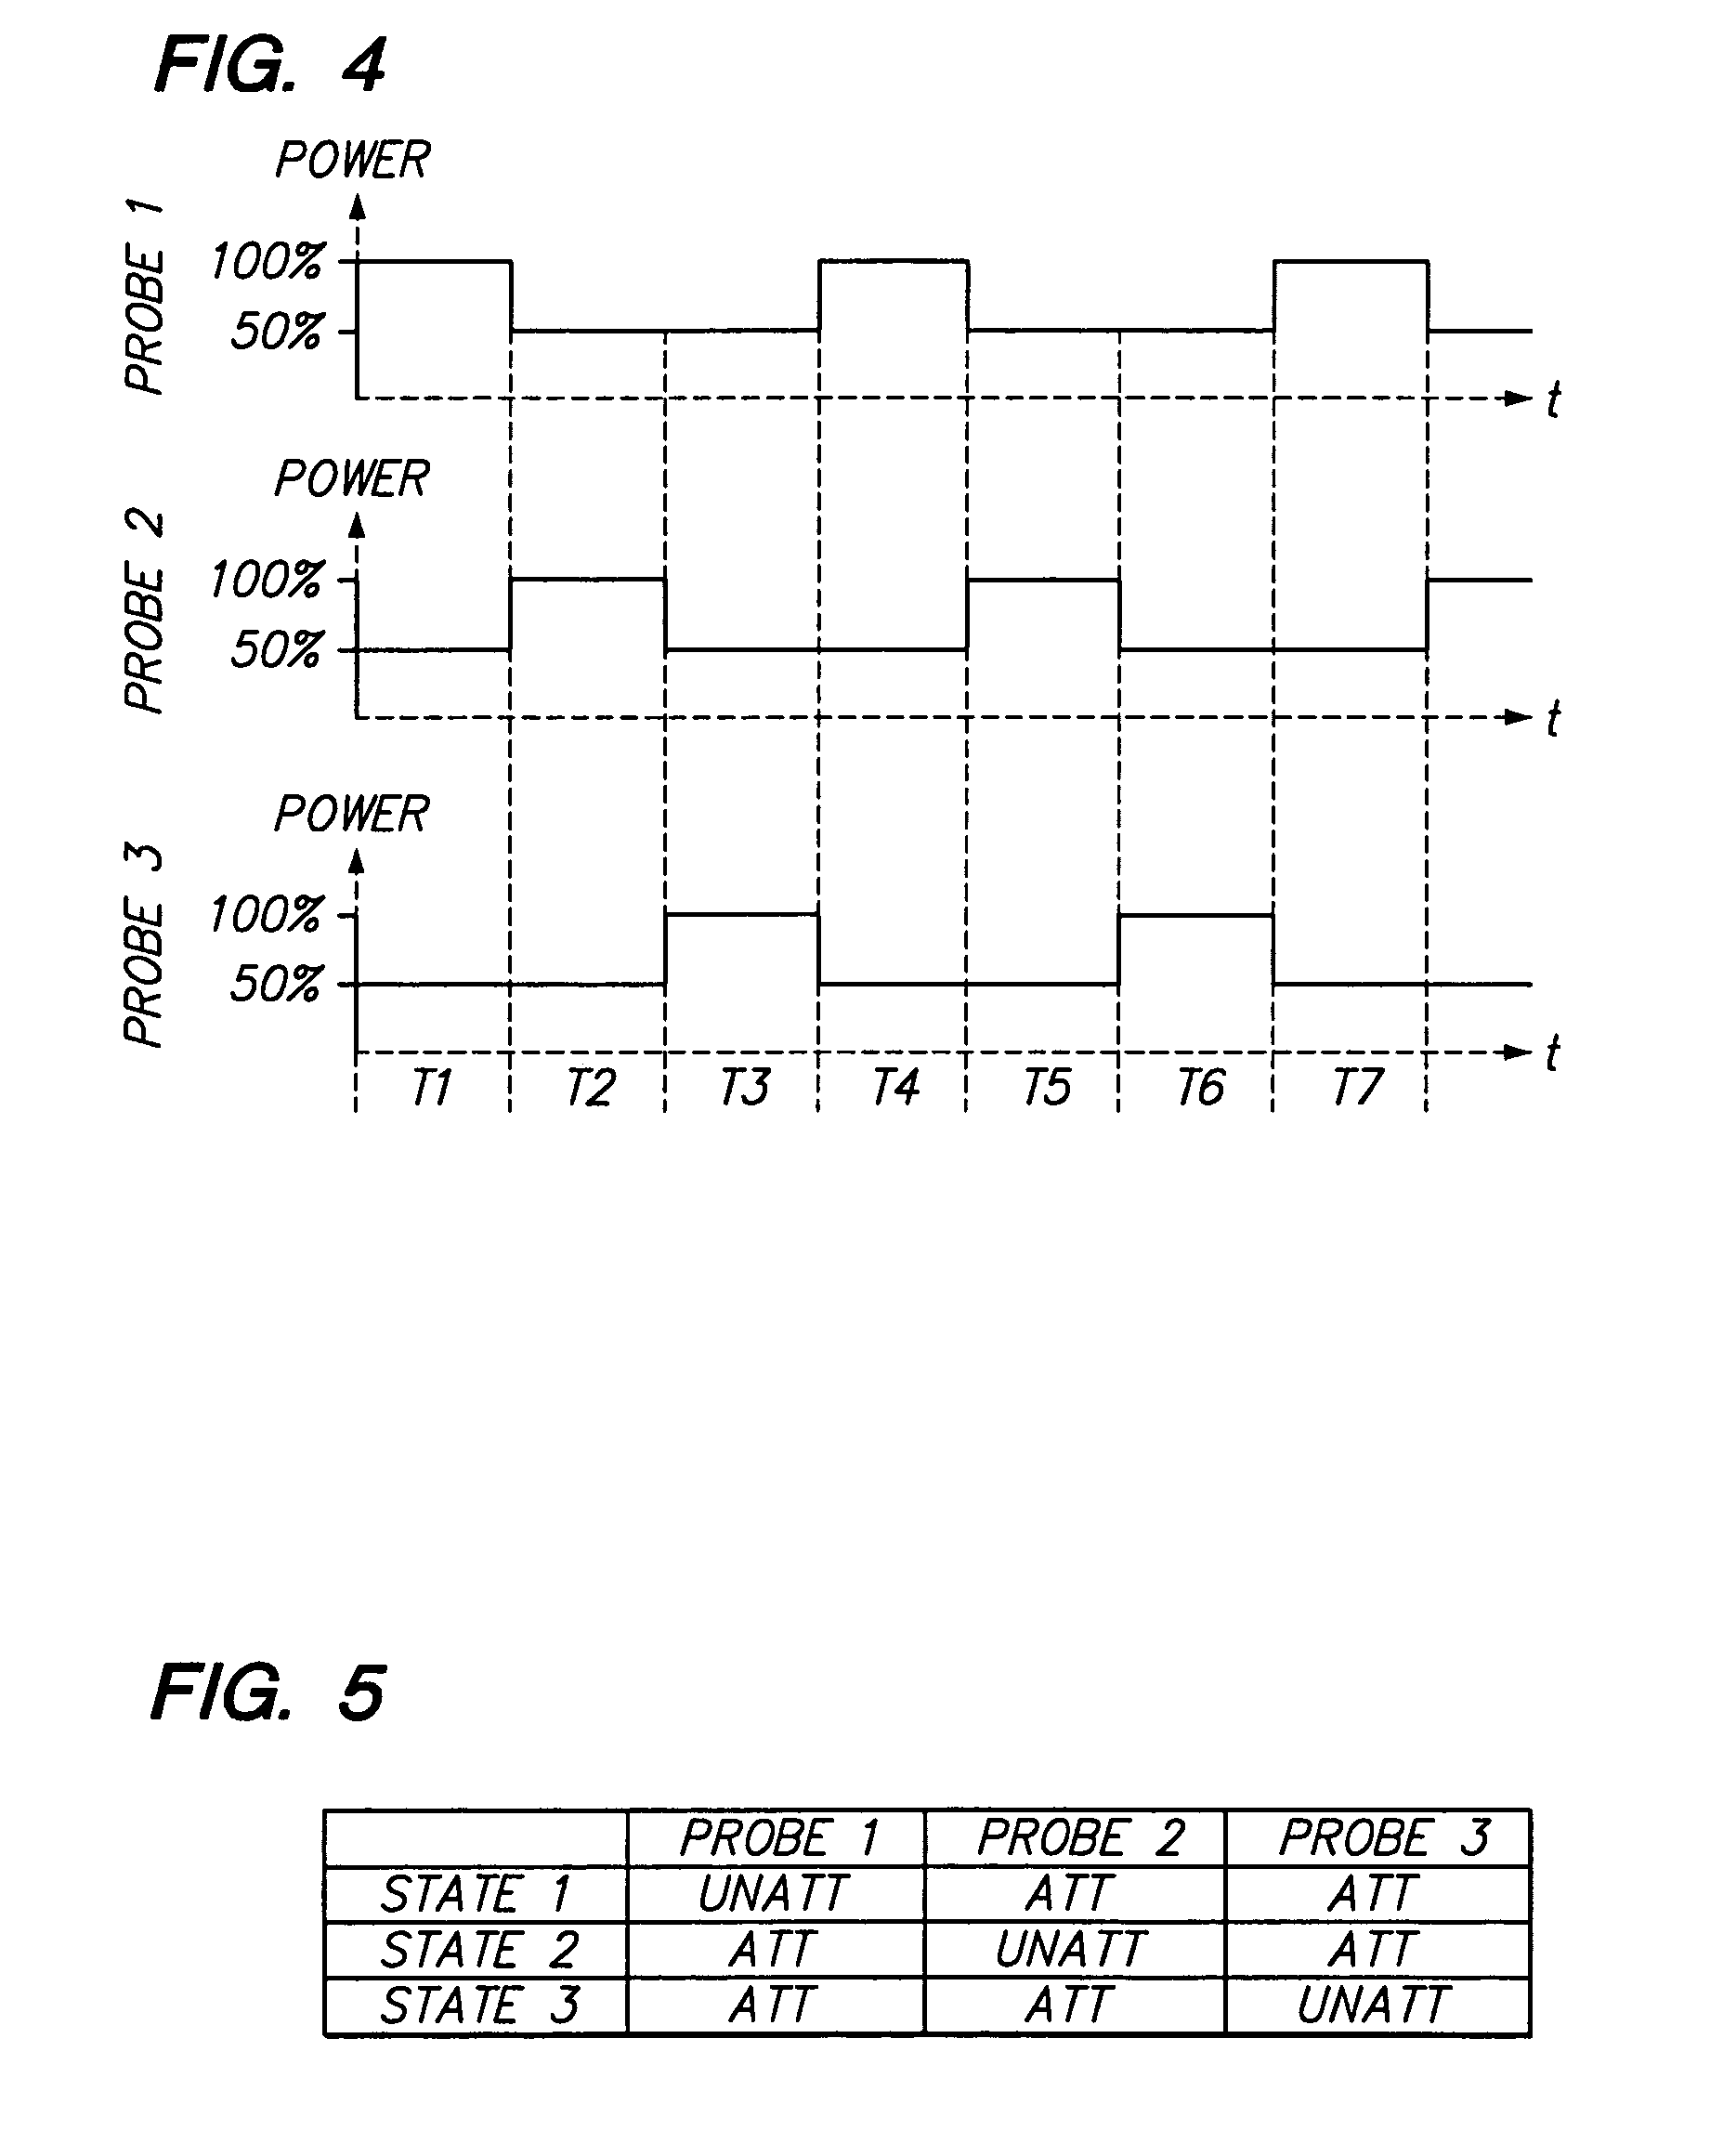 Apparatus for switching nominal and attenuated power between ablation probes